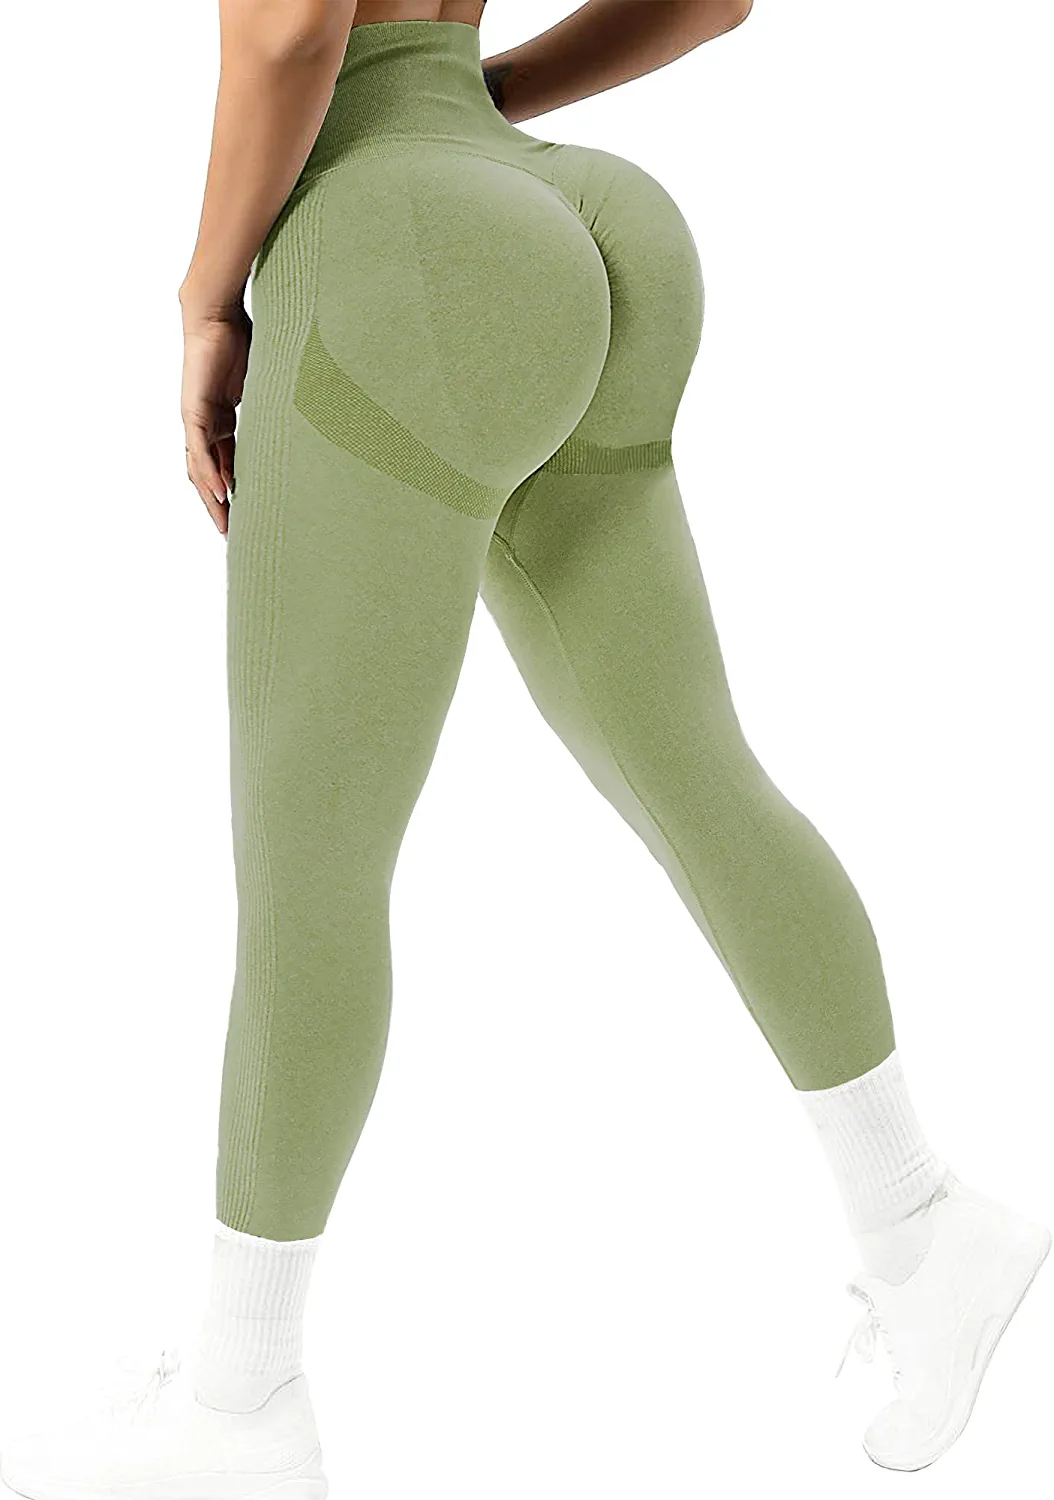 COMFREE Womens Yoga Pants Tummy Control Tights Butt Lifter Casual